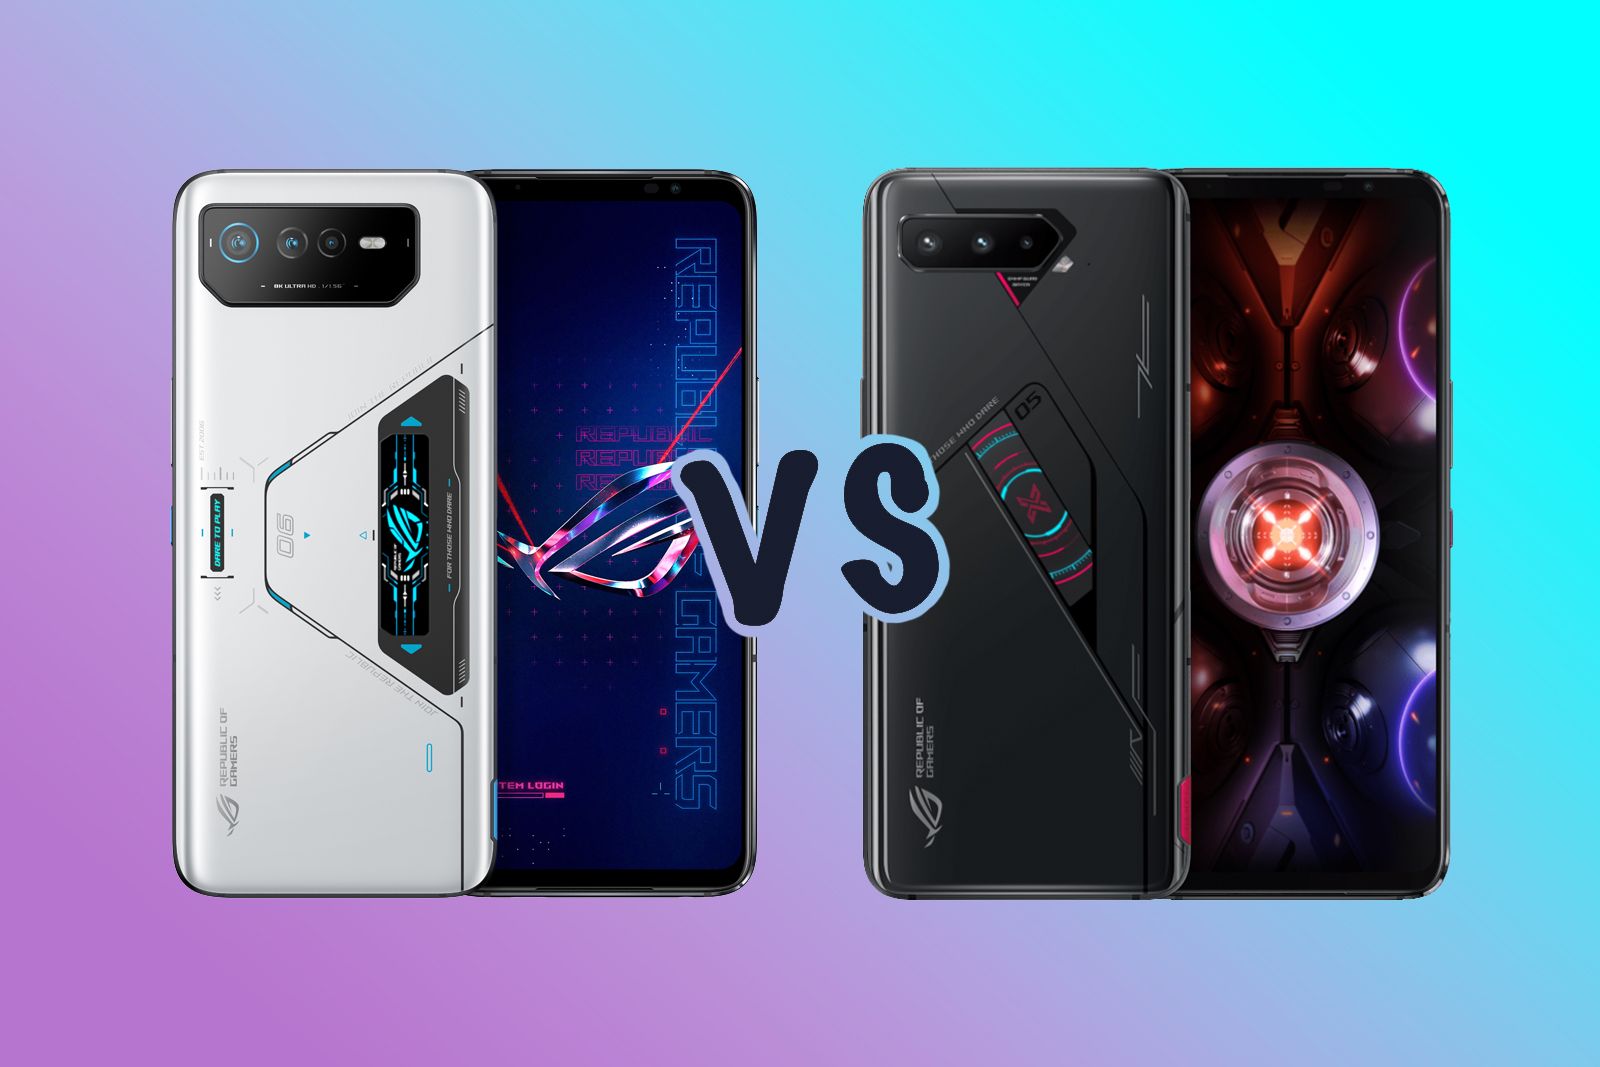 ROG Phone 6 vs ROG Phone 5 vs ROG Phone 5S: What's the difference?